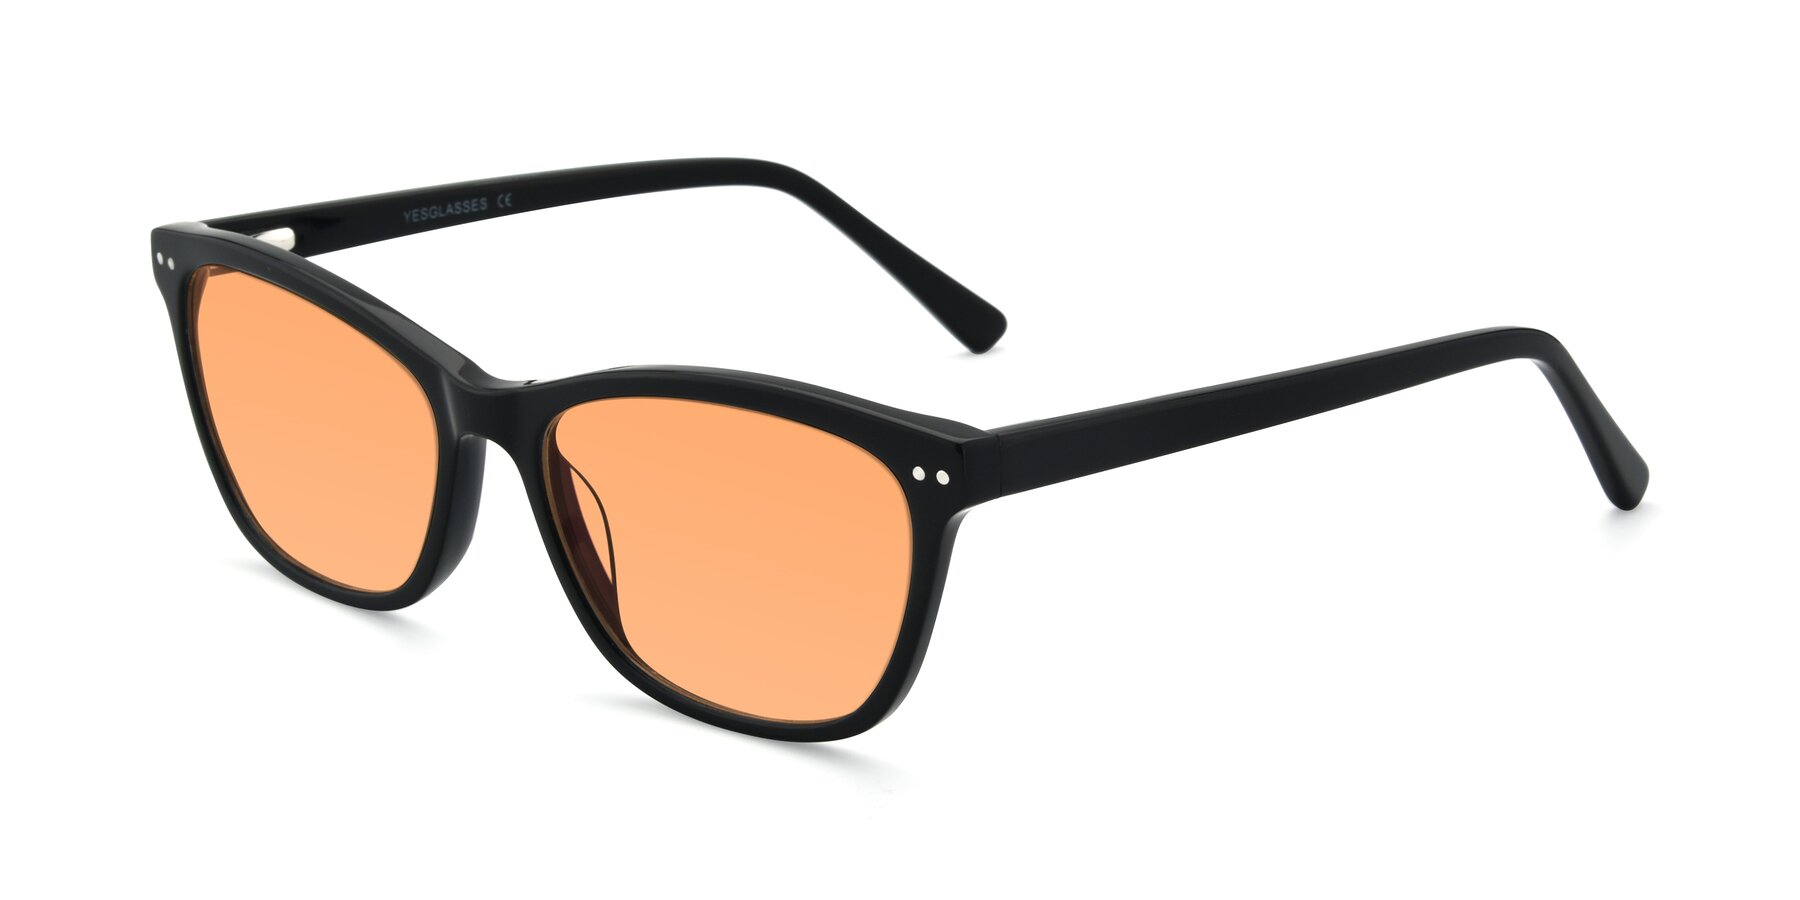 Angle of 17350 in Black with Medium Orange Tinted Lenses